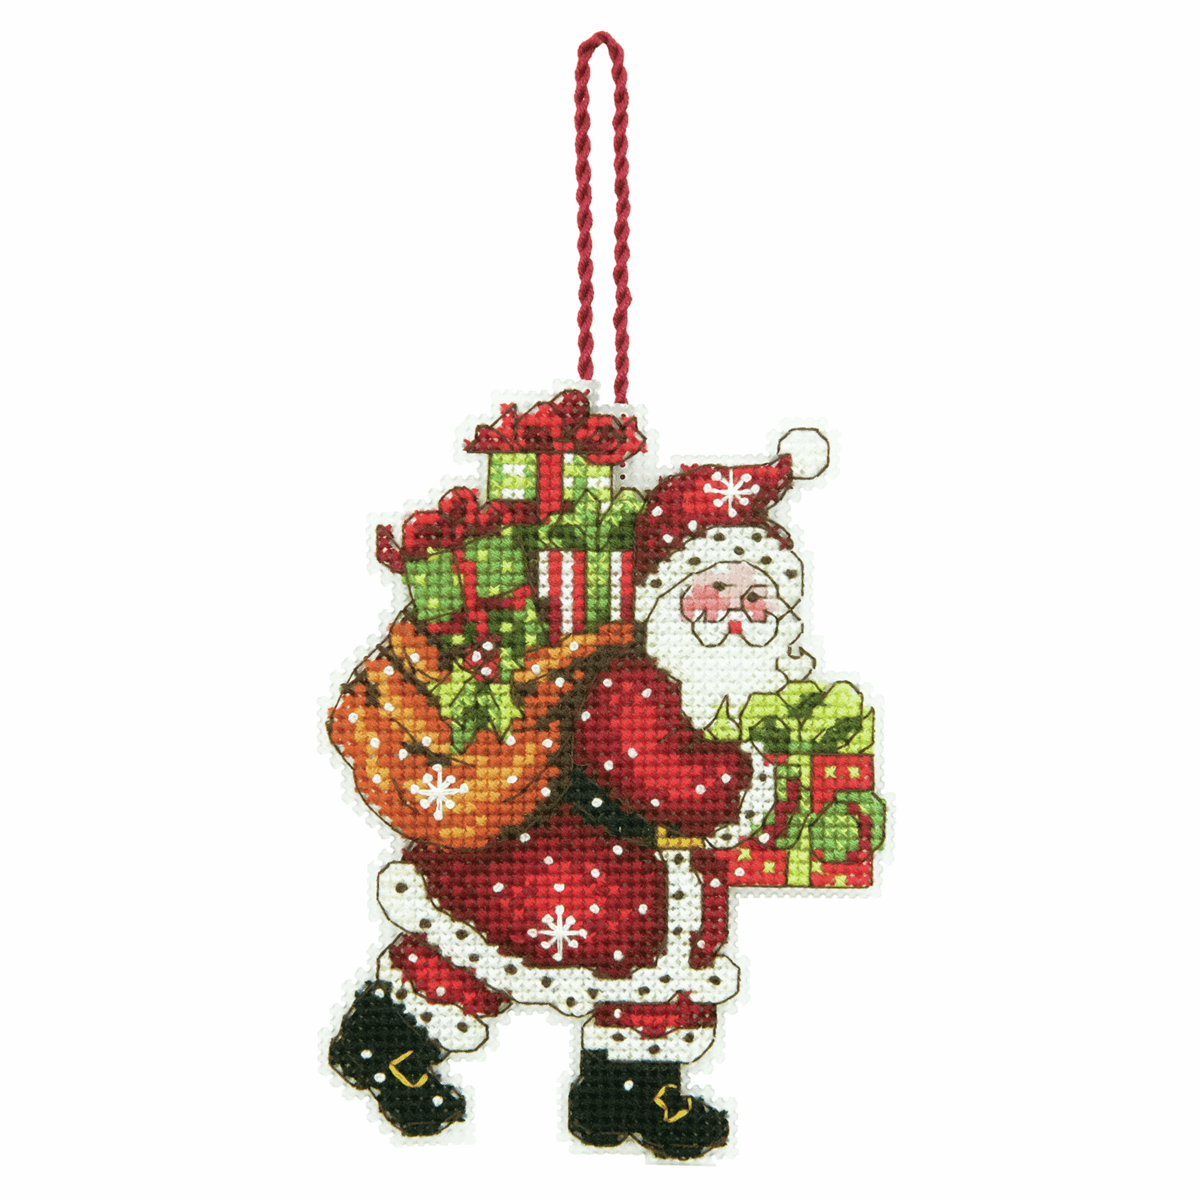 Counted Cross Stitch Ornament Kit - Santa With His Bag